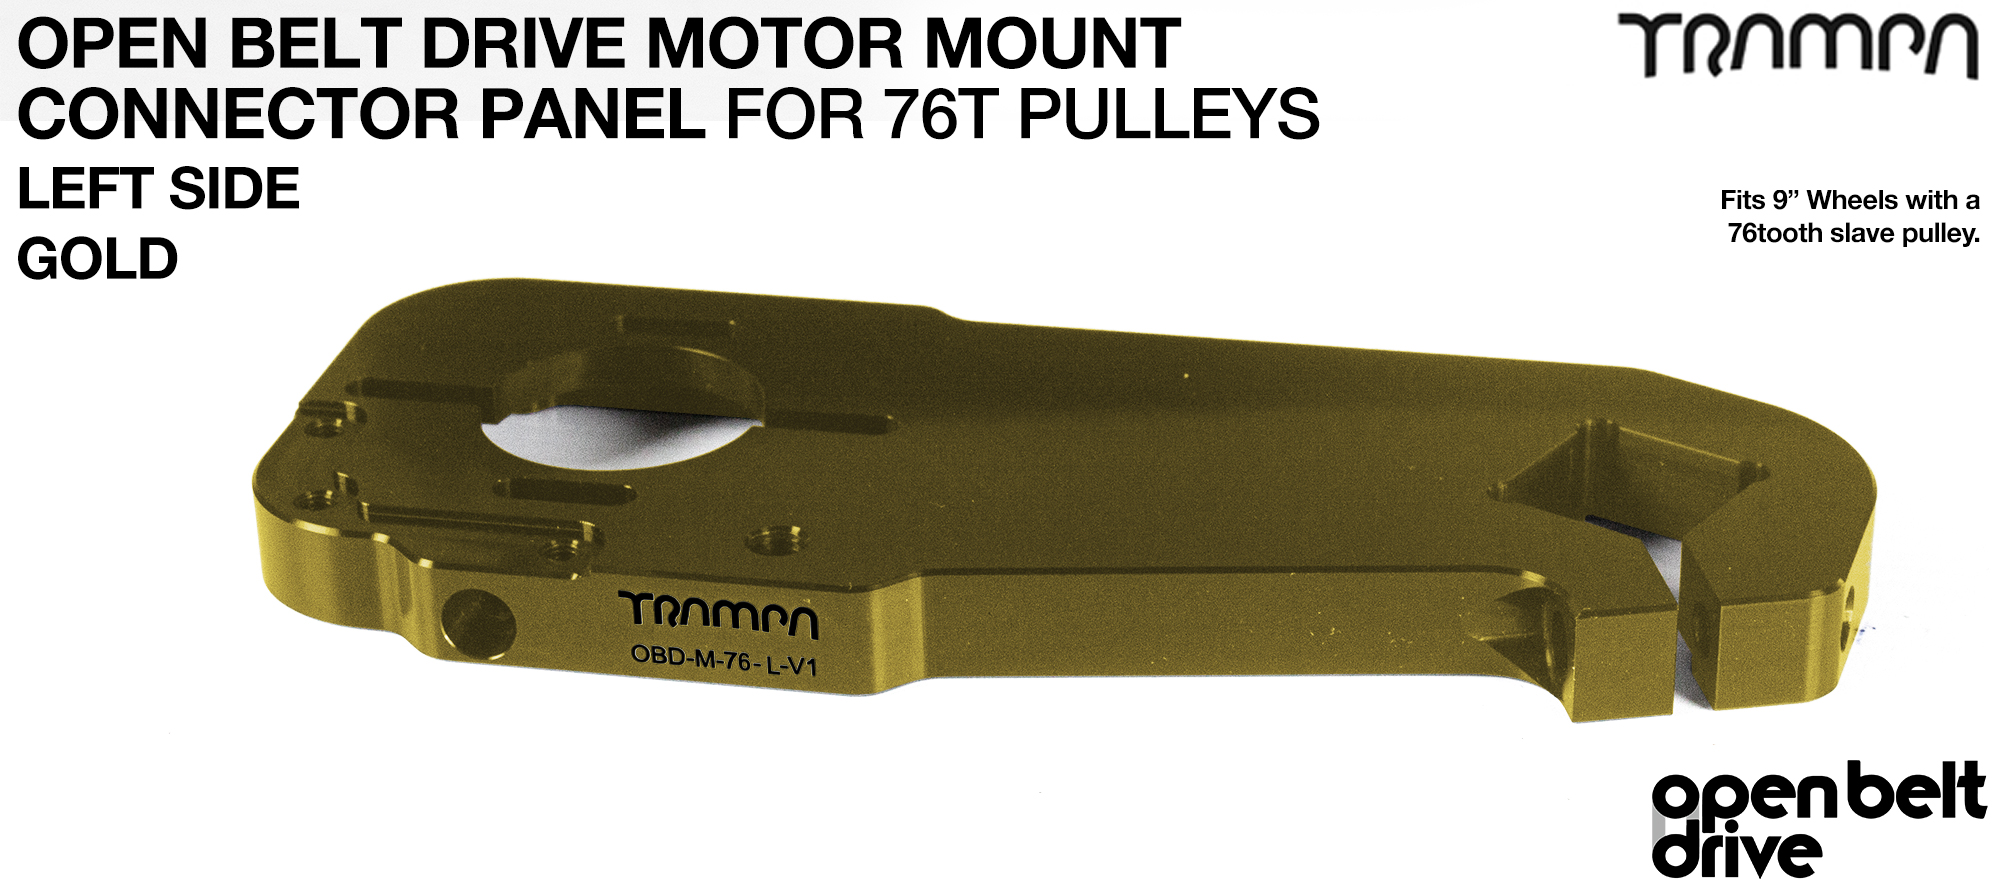 OBD Motor Mount Connector Panel for 76 tooth pulleys - REGULAR - GOLD